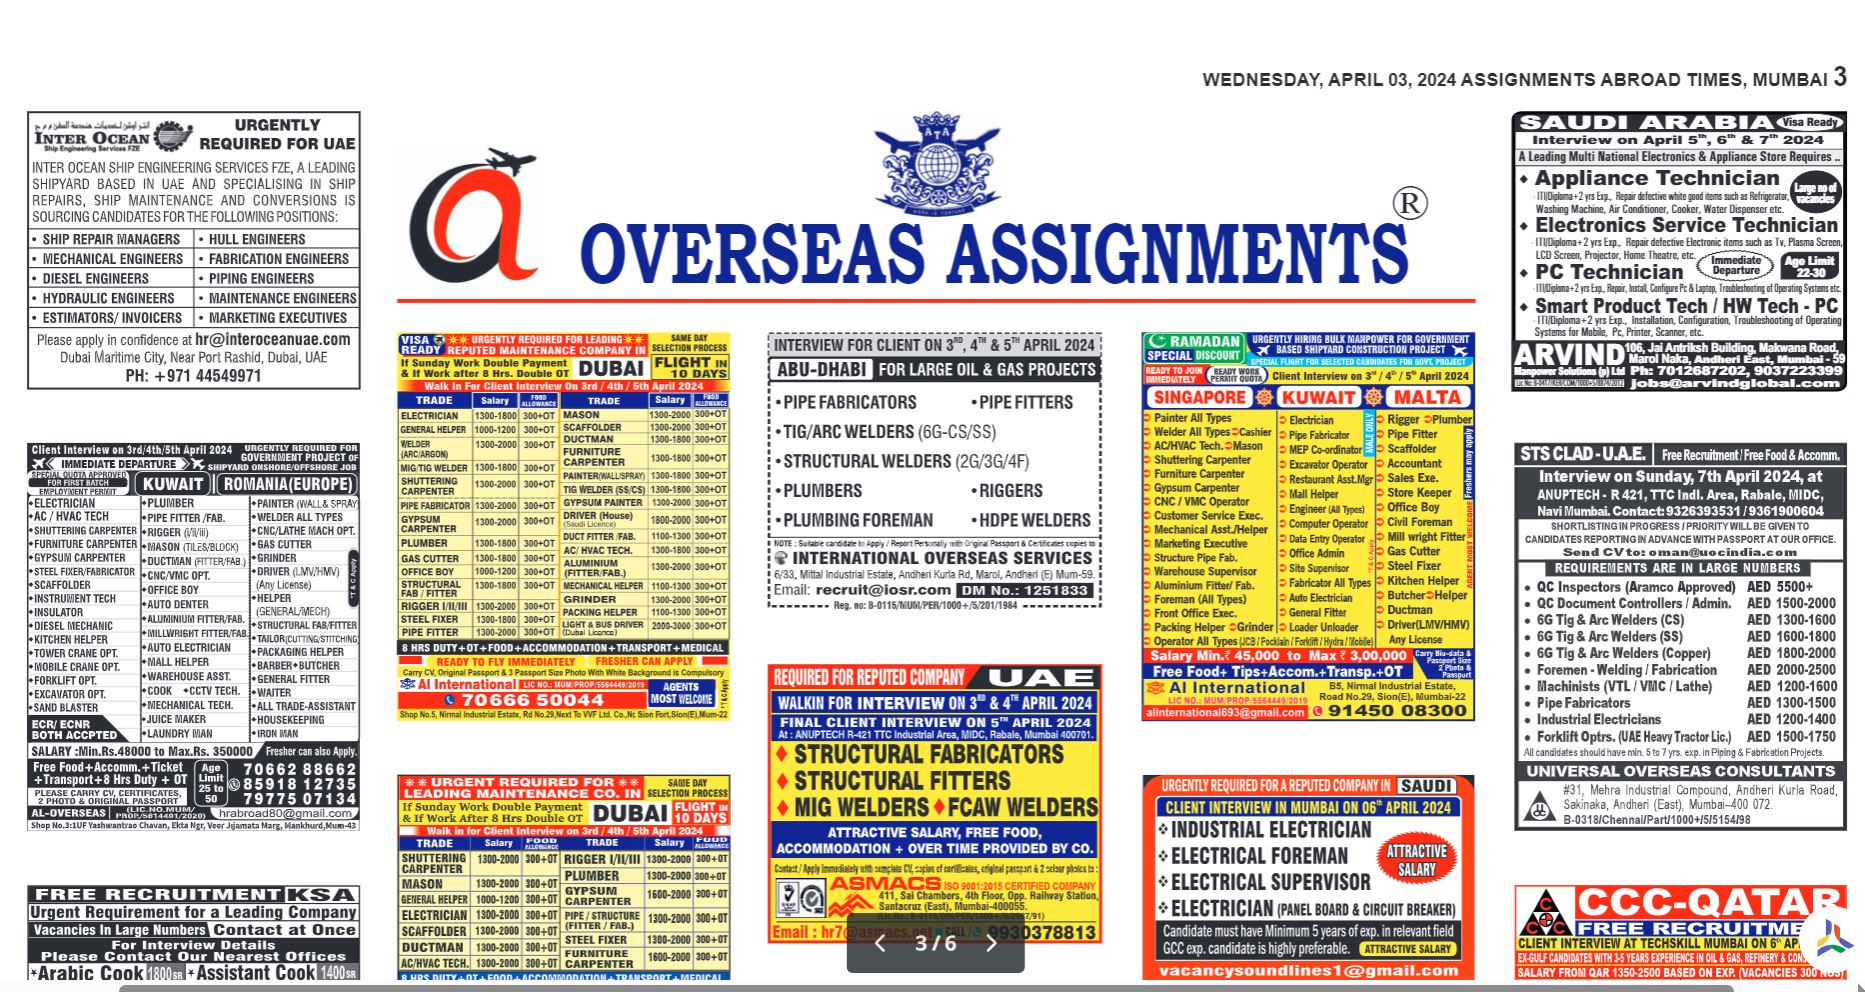 assignment abroad times 24 september 2022